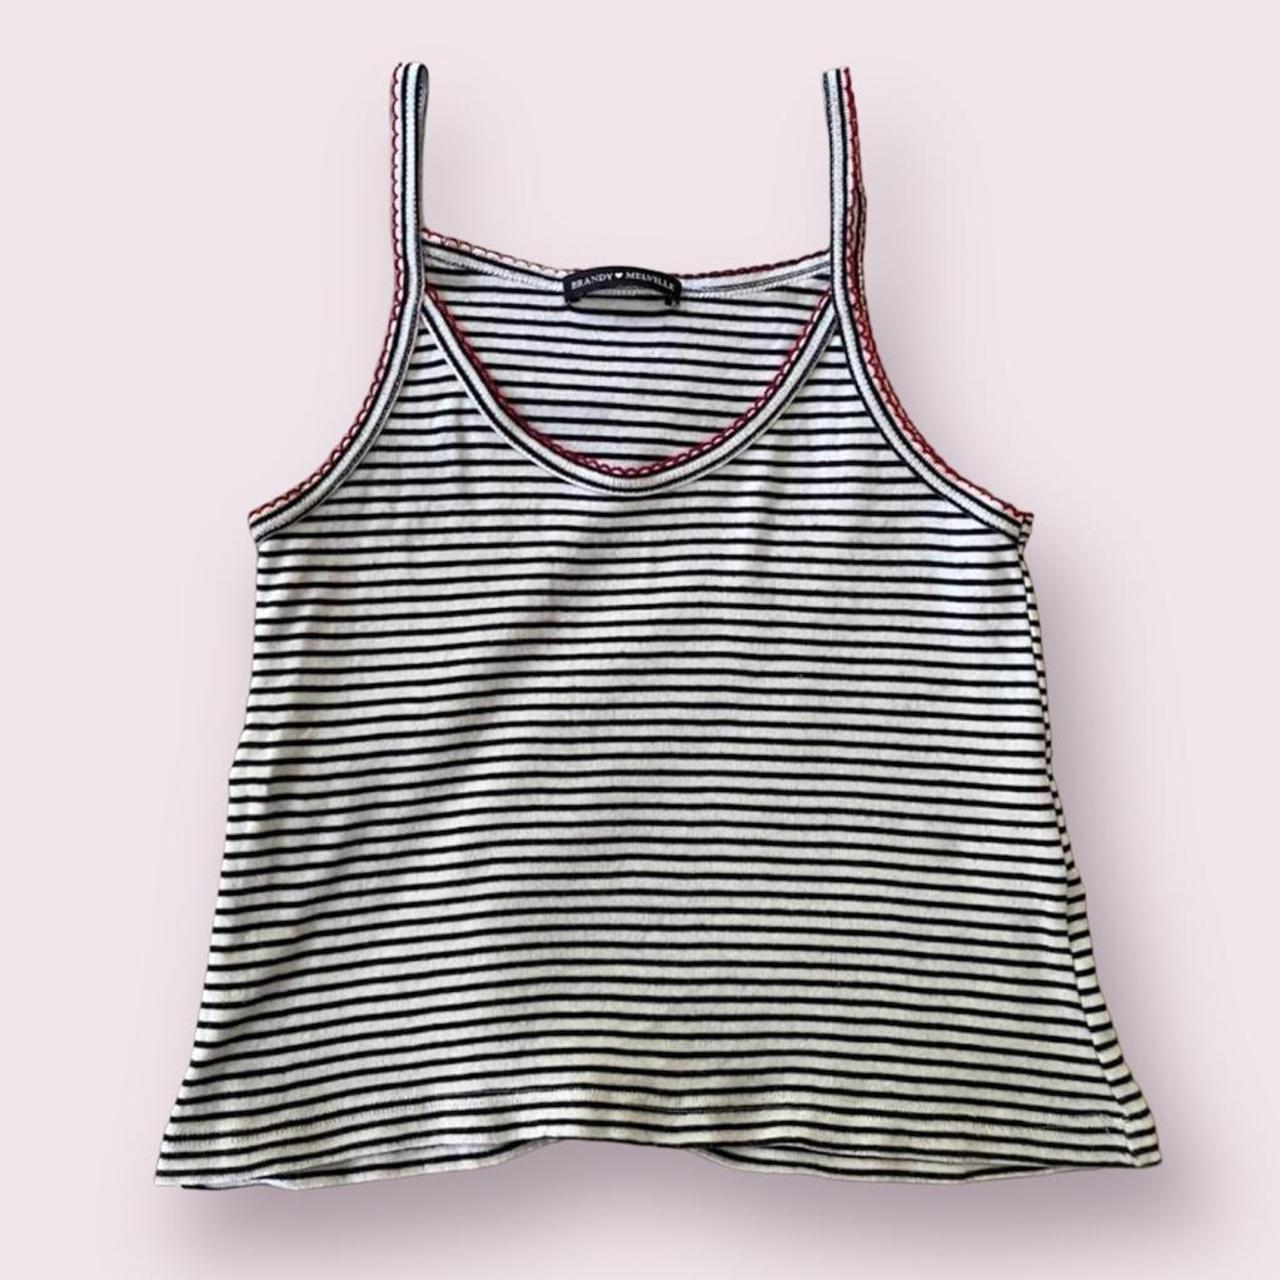 Brandy Melville Women's Ribbed Grey Gray Button Up Tank Size XS/S